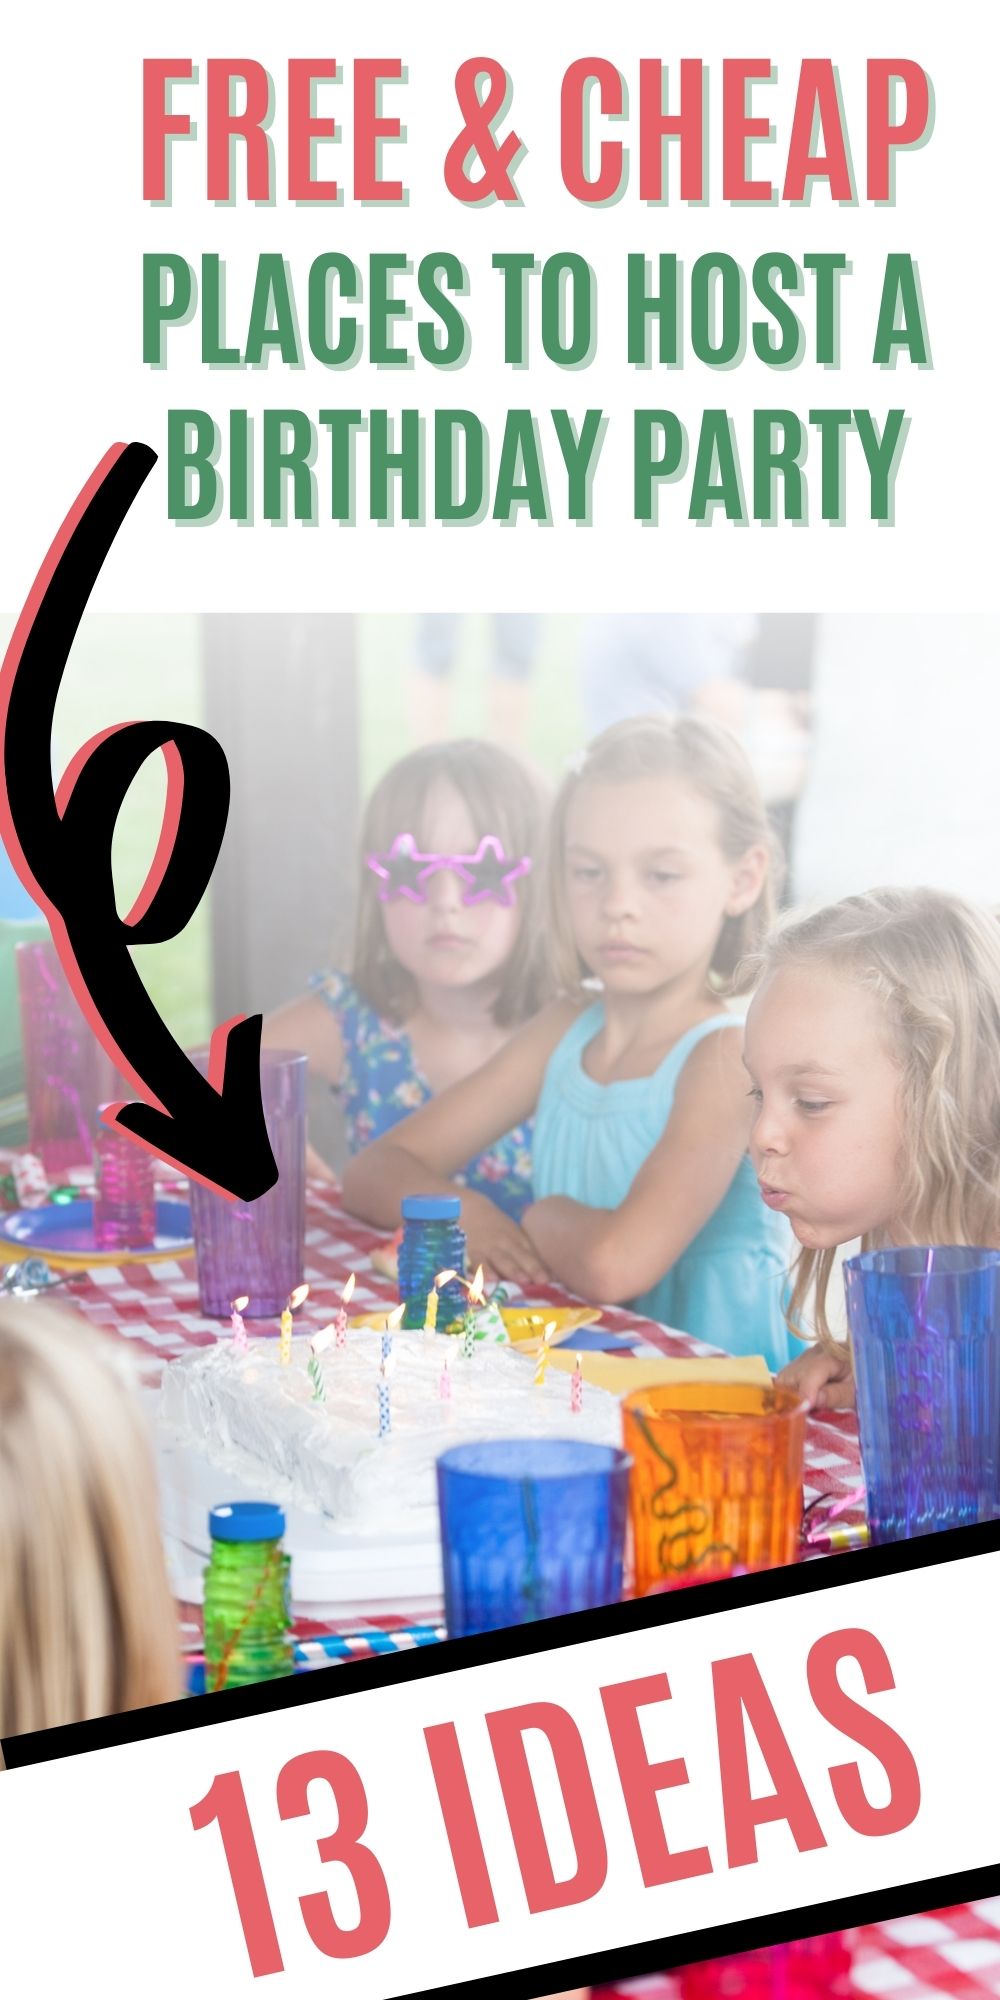 Free & Cheap Places to Throw a Birthday Party - Celebrating with kids